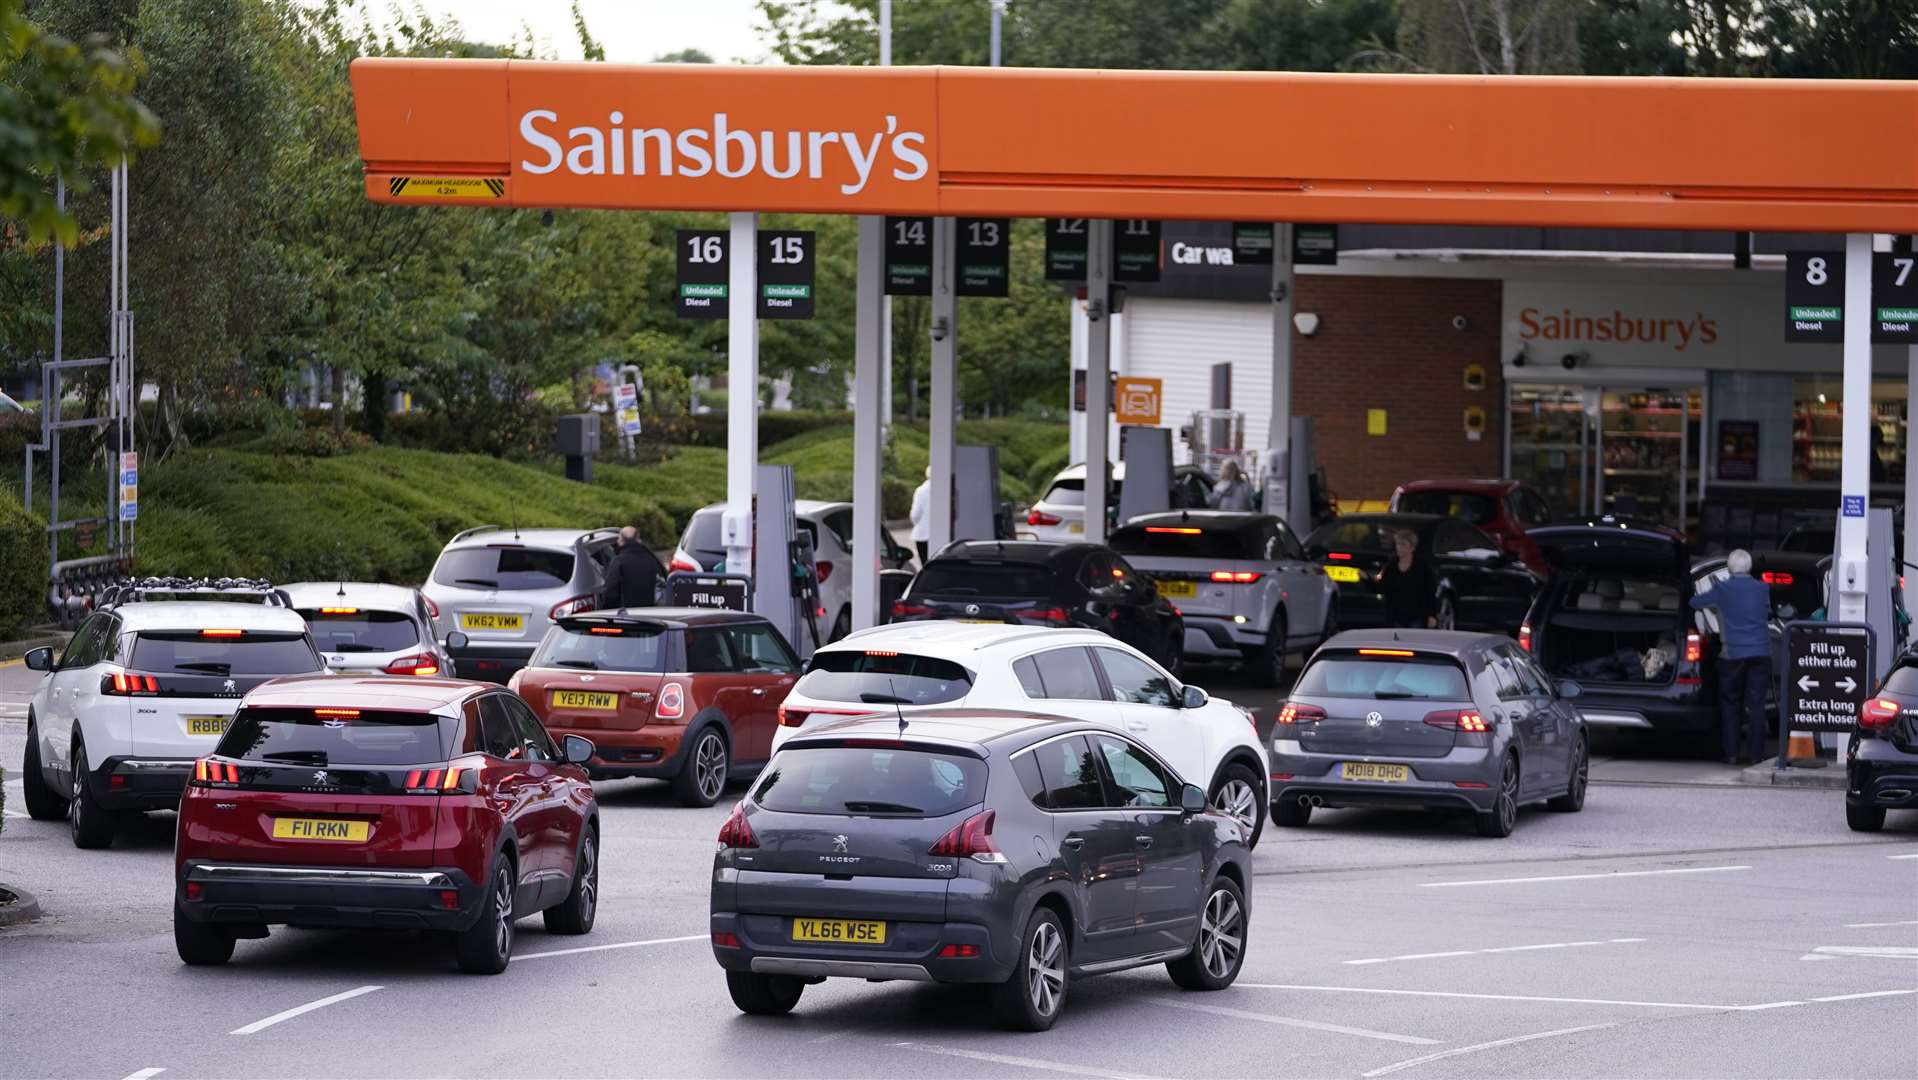 Queues at a Sainsbury’s Petrol Station in Colton, Leeds, on Friday morning (Danny Lawson/PA)